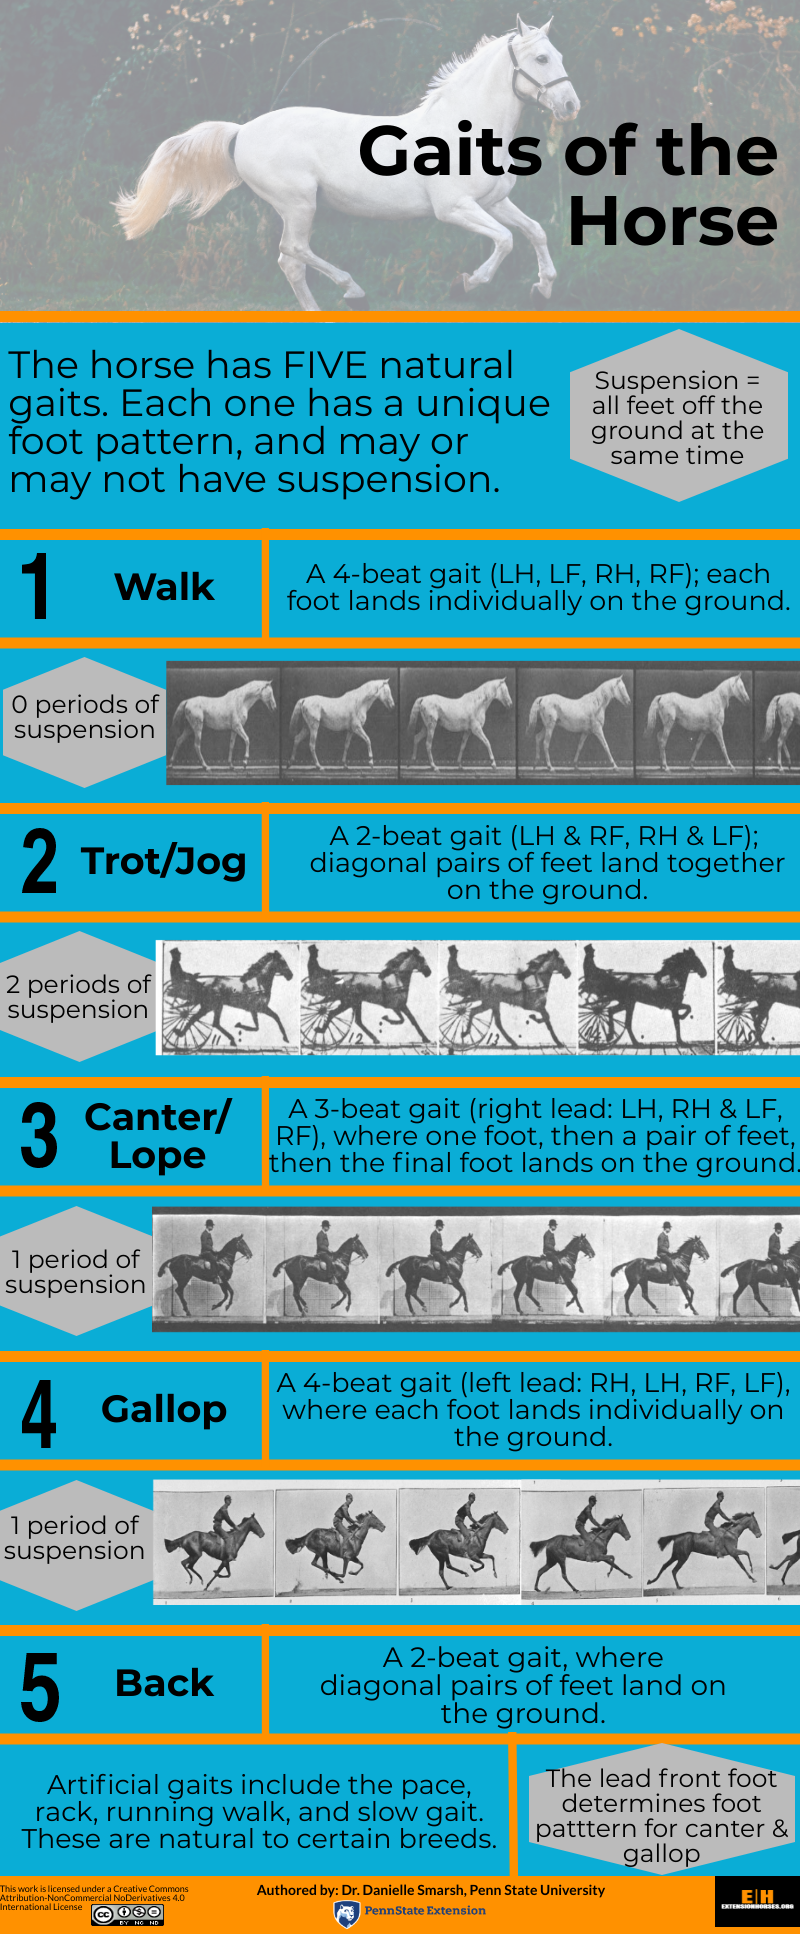 Gaits of the Horse